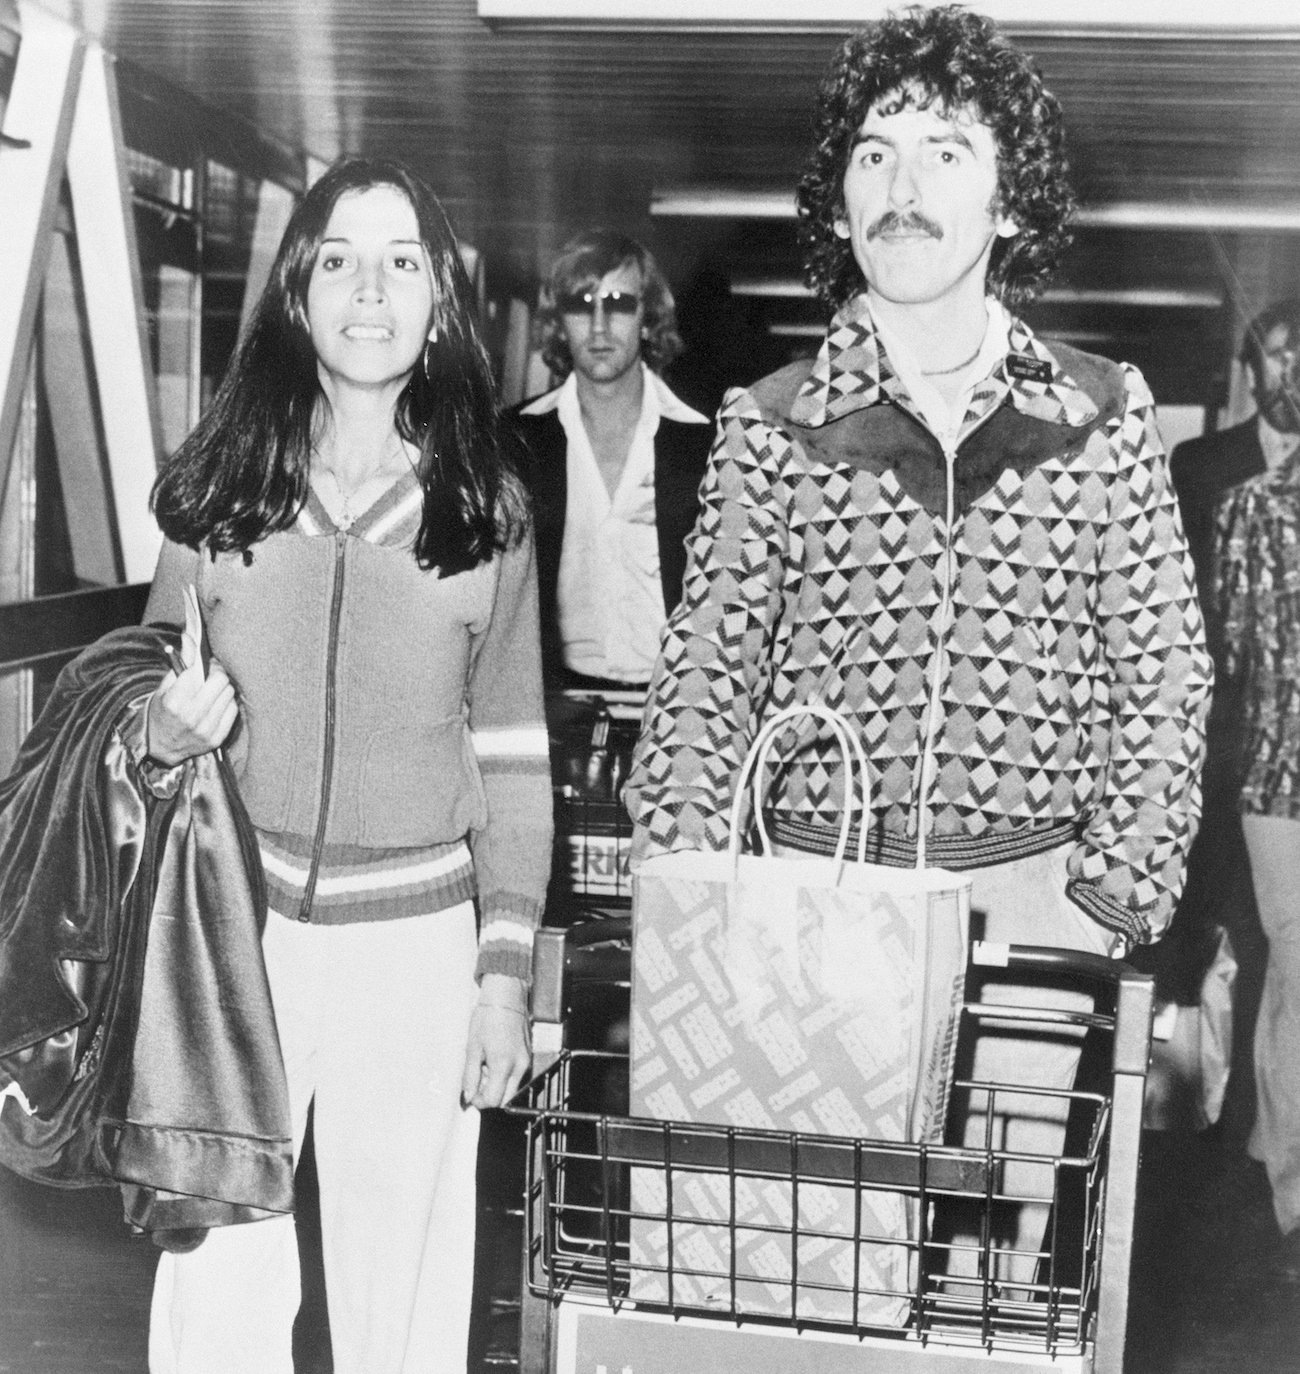 George Harrison and his wife Olivia at the airport in 1978.